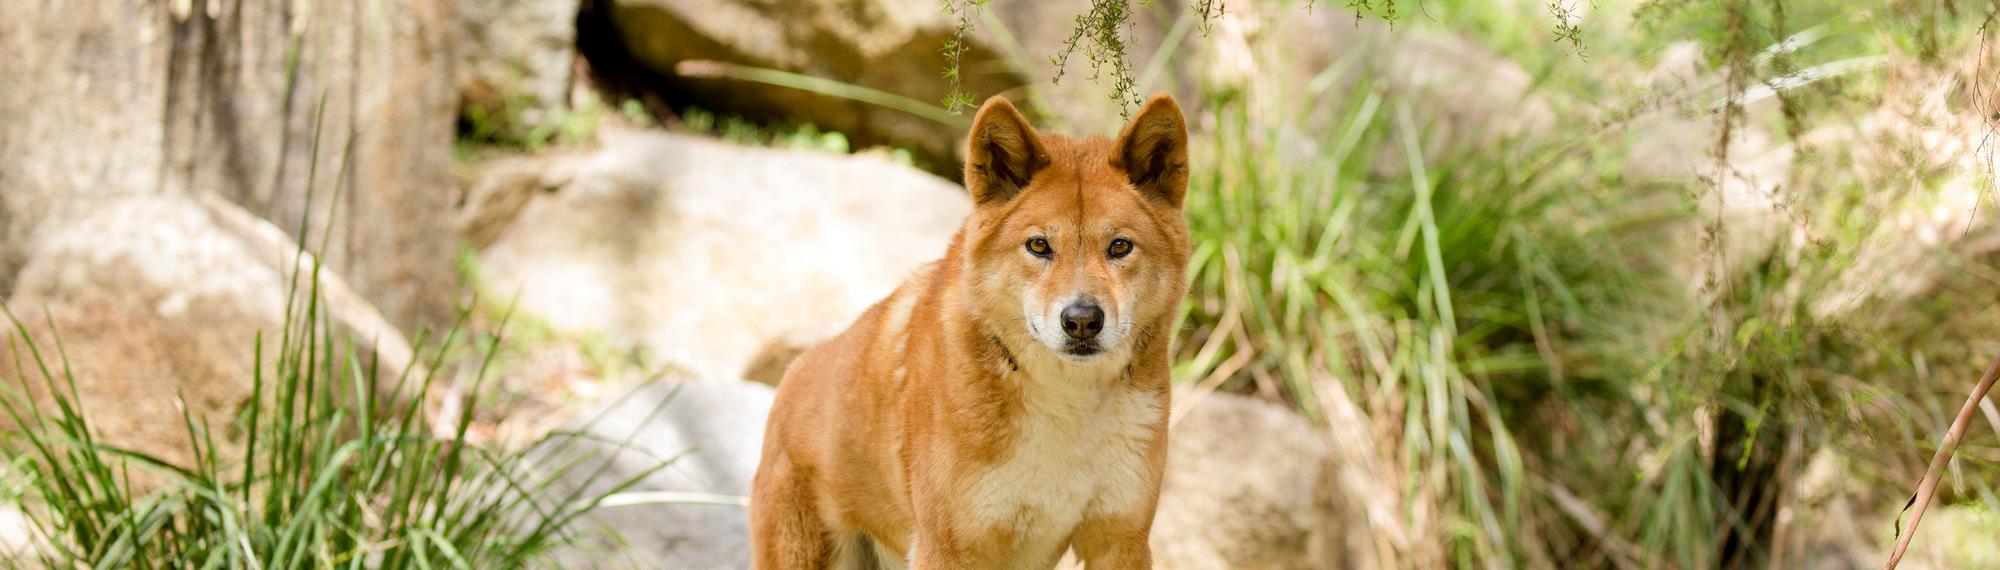 Dingo looking sternly at camera. He is a orange brown colour with ears up, standing on a log in a rocky grassed habitat.